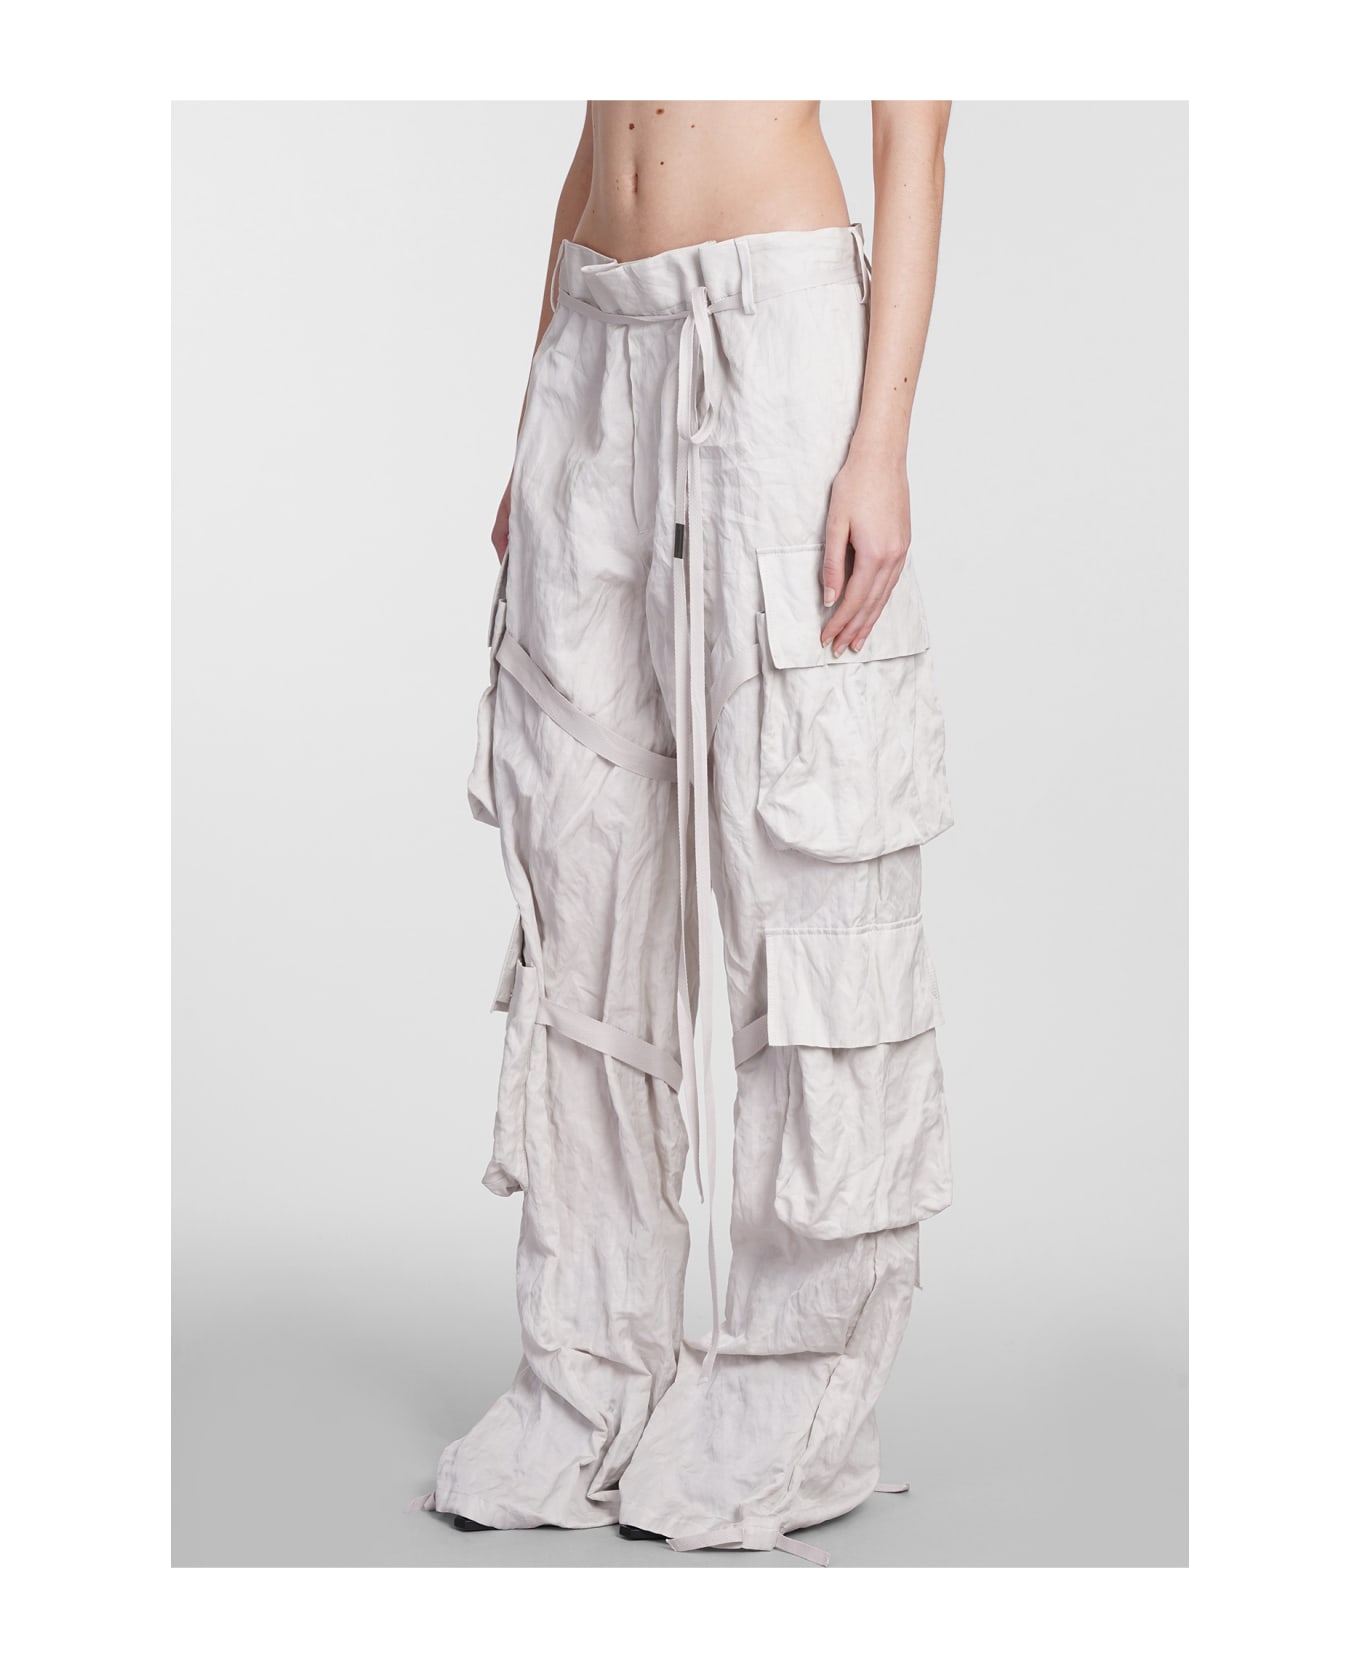 Ann Demeulemeester Pants In Grey Cotton - GREY